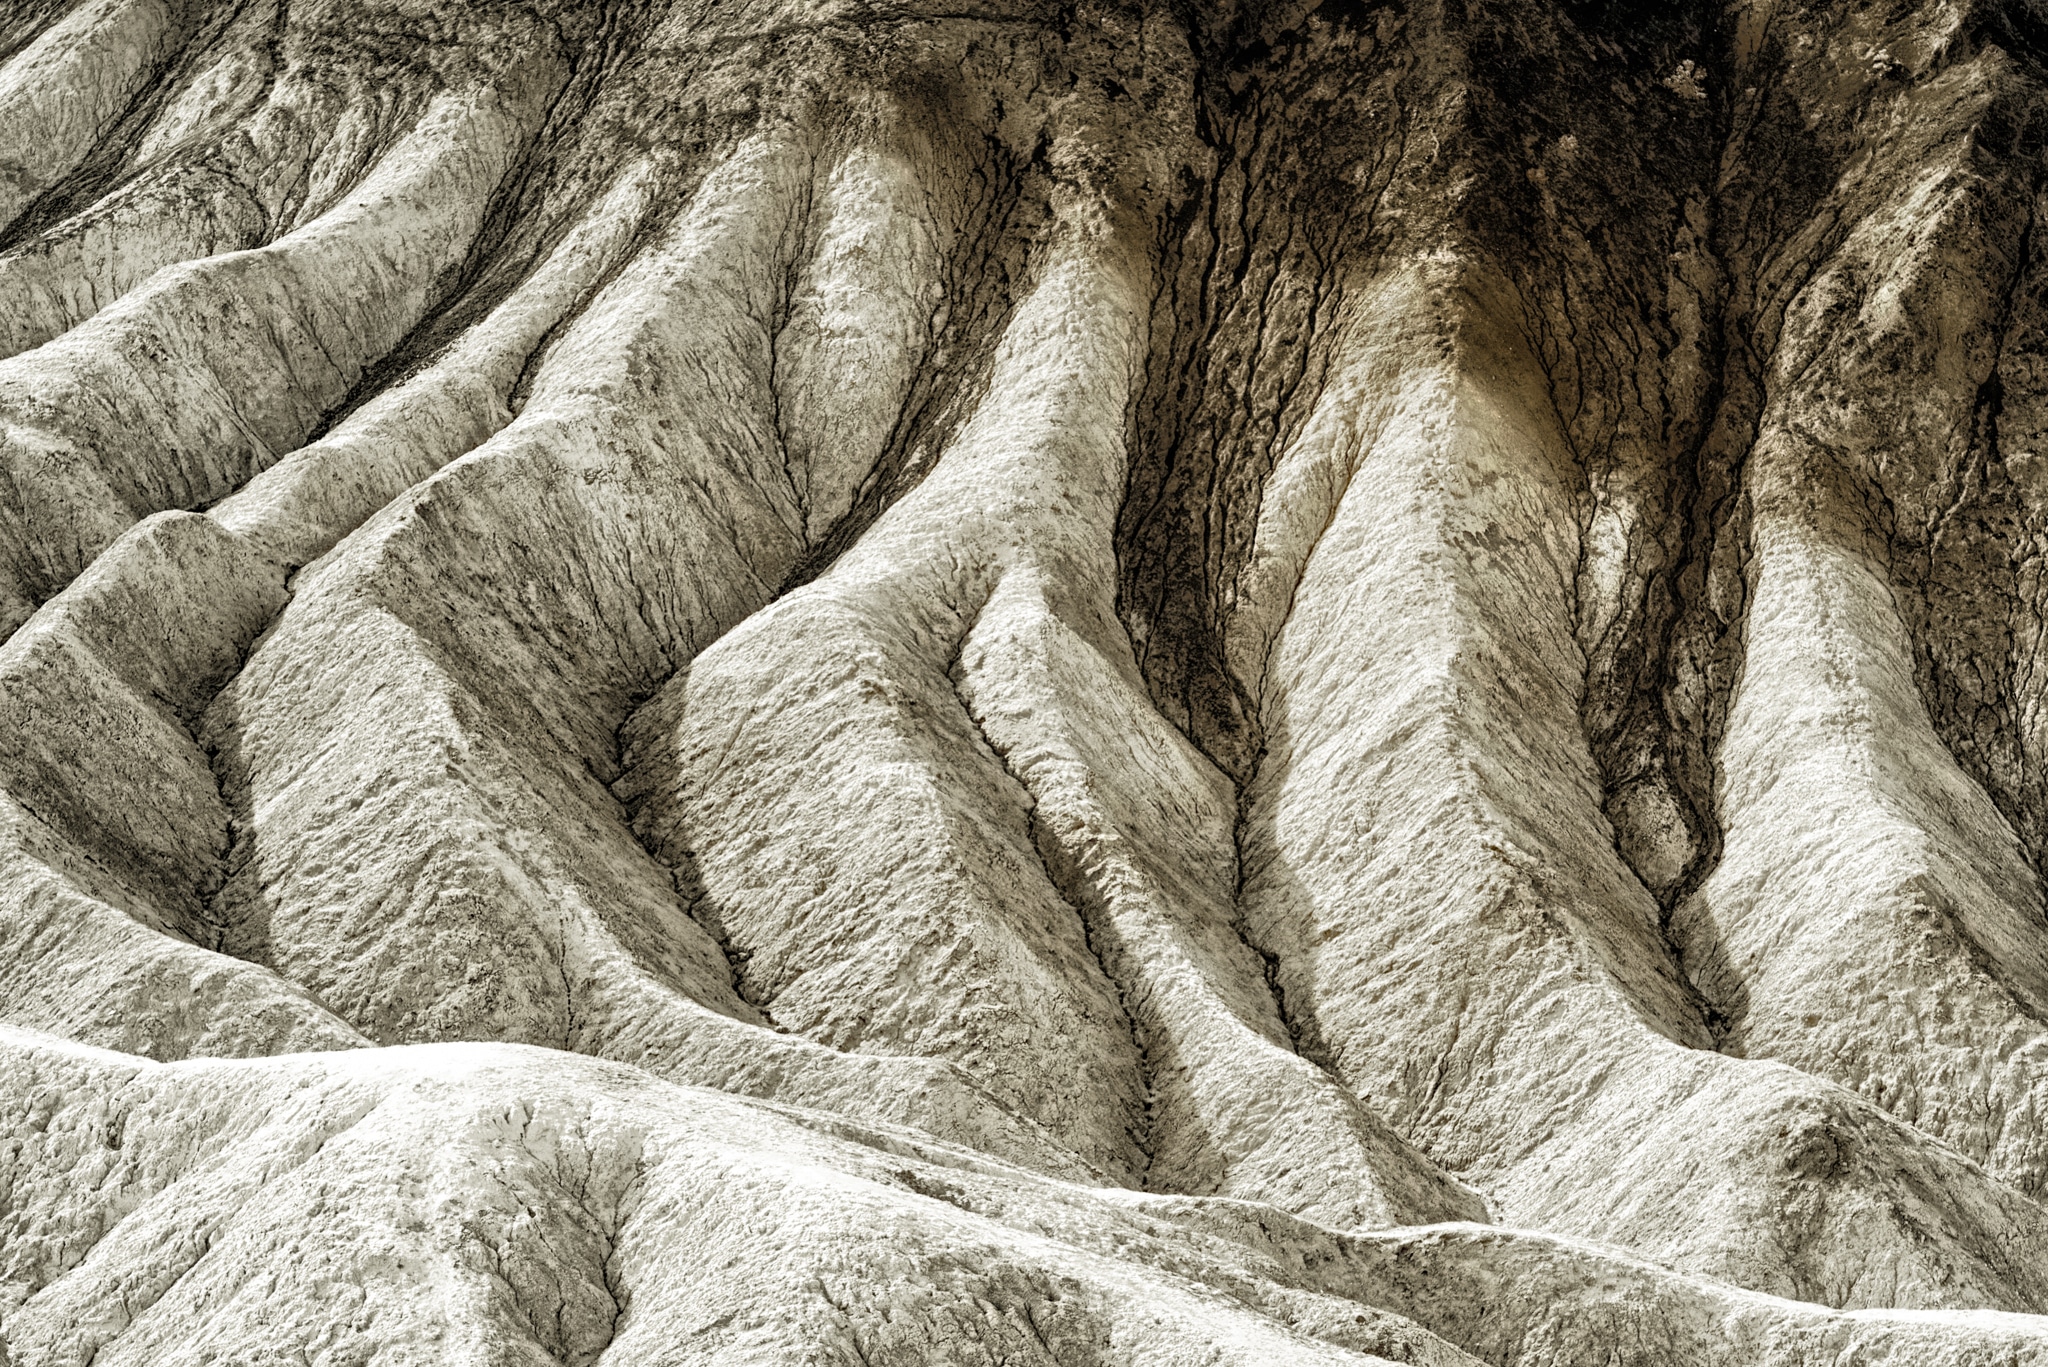 The badlands visible from the Zabriskie Point Overlook, which is accessible from Highway 190 in Death Valley National Park, are examples of dendritic drainage caused by periodic flooding.